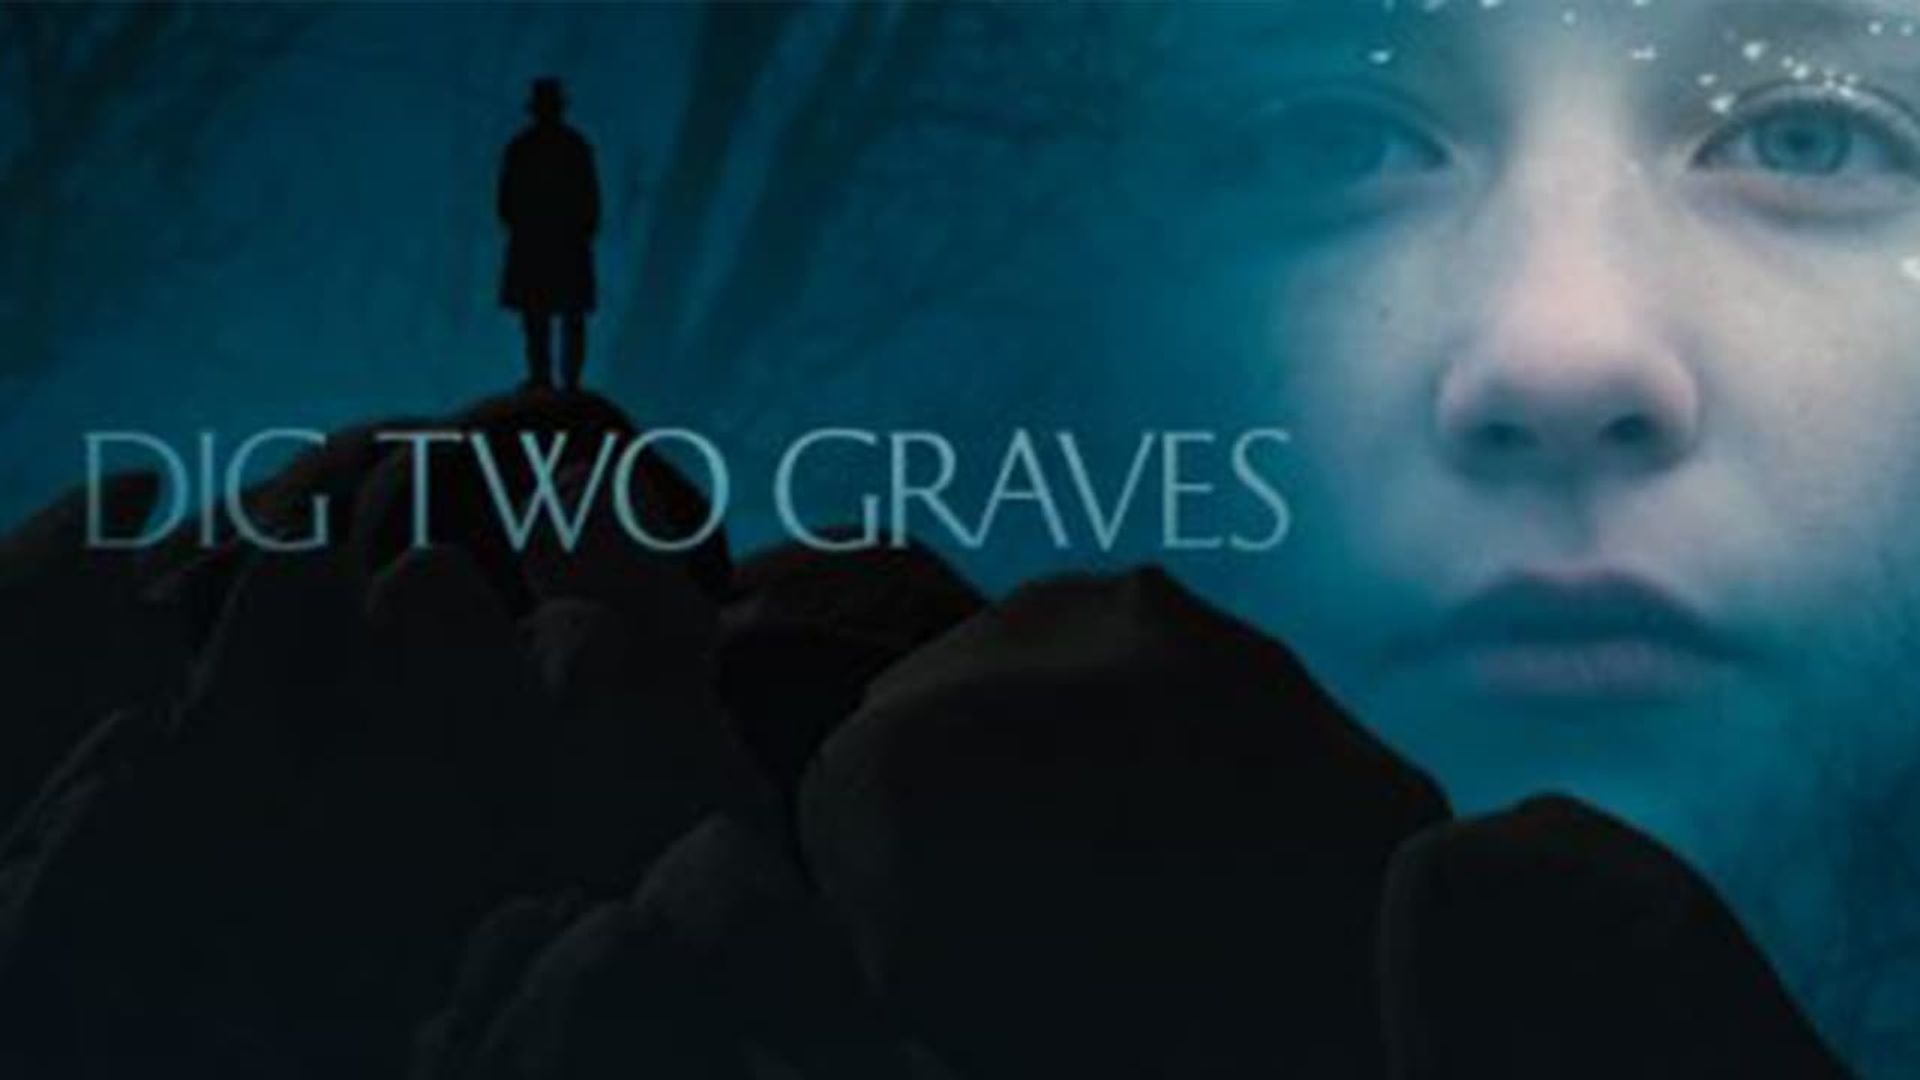 Dig Two Graves background